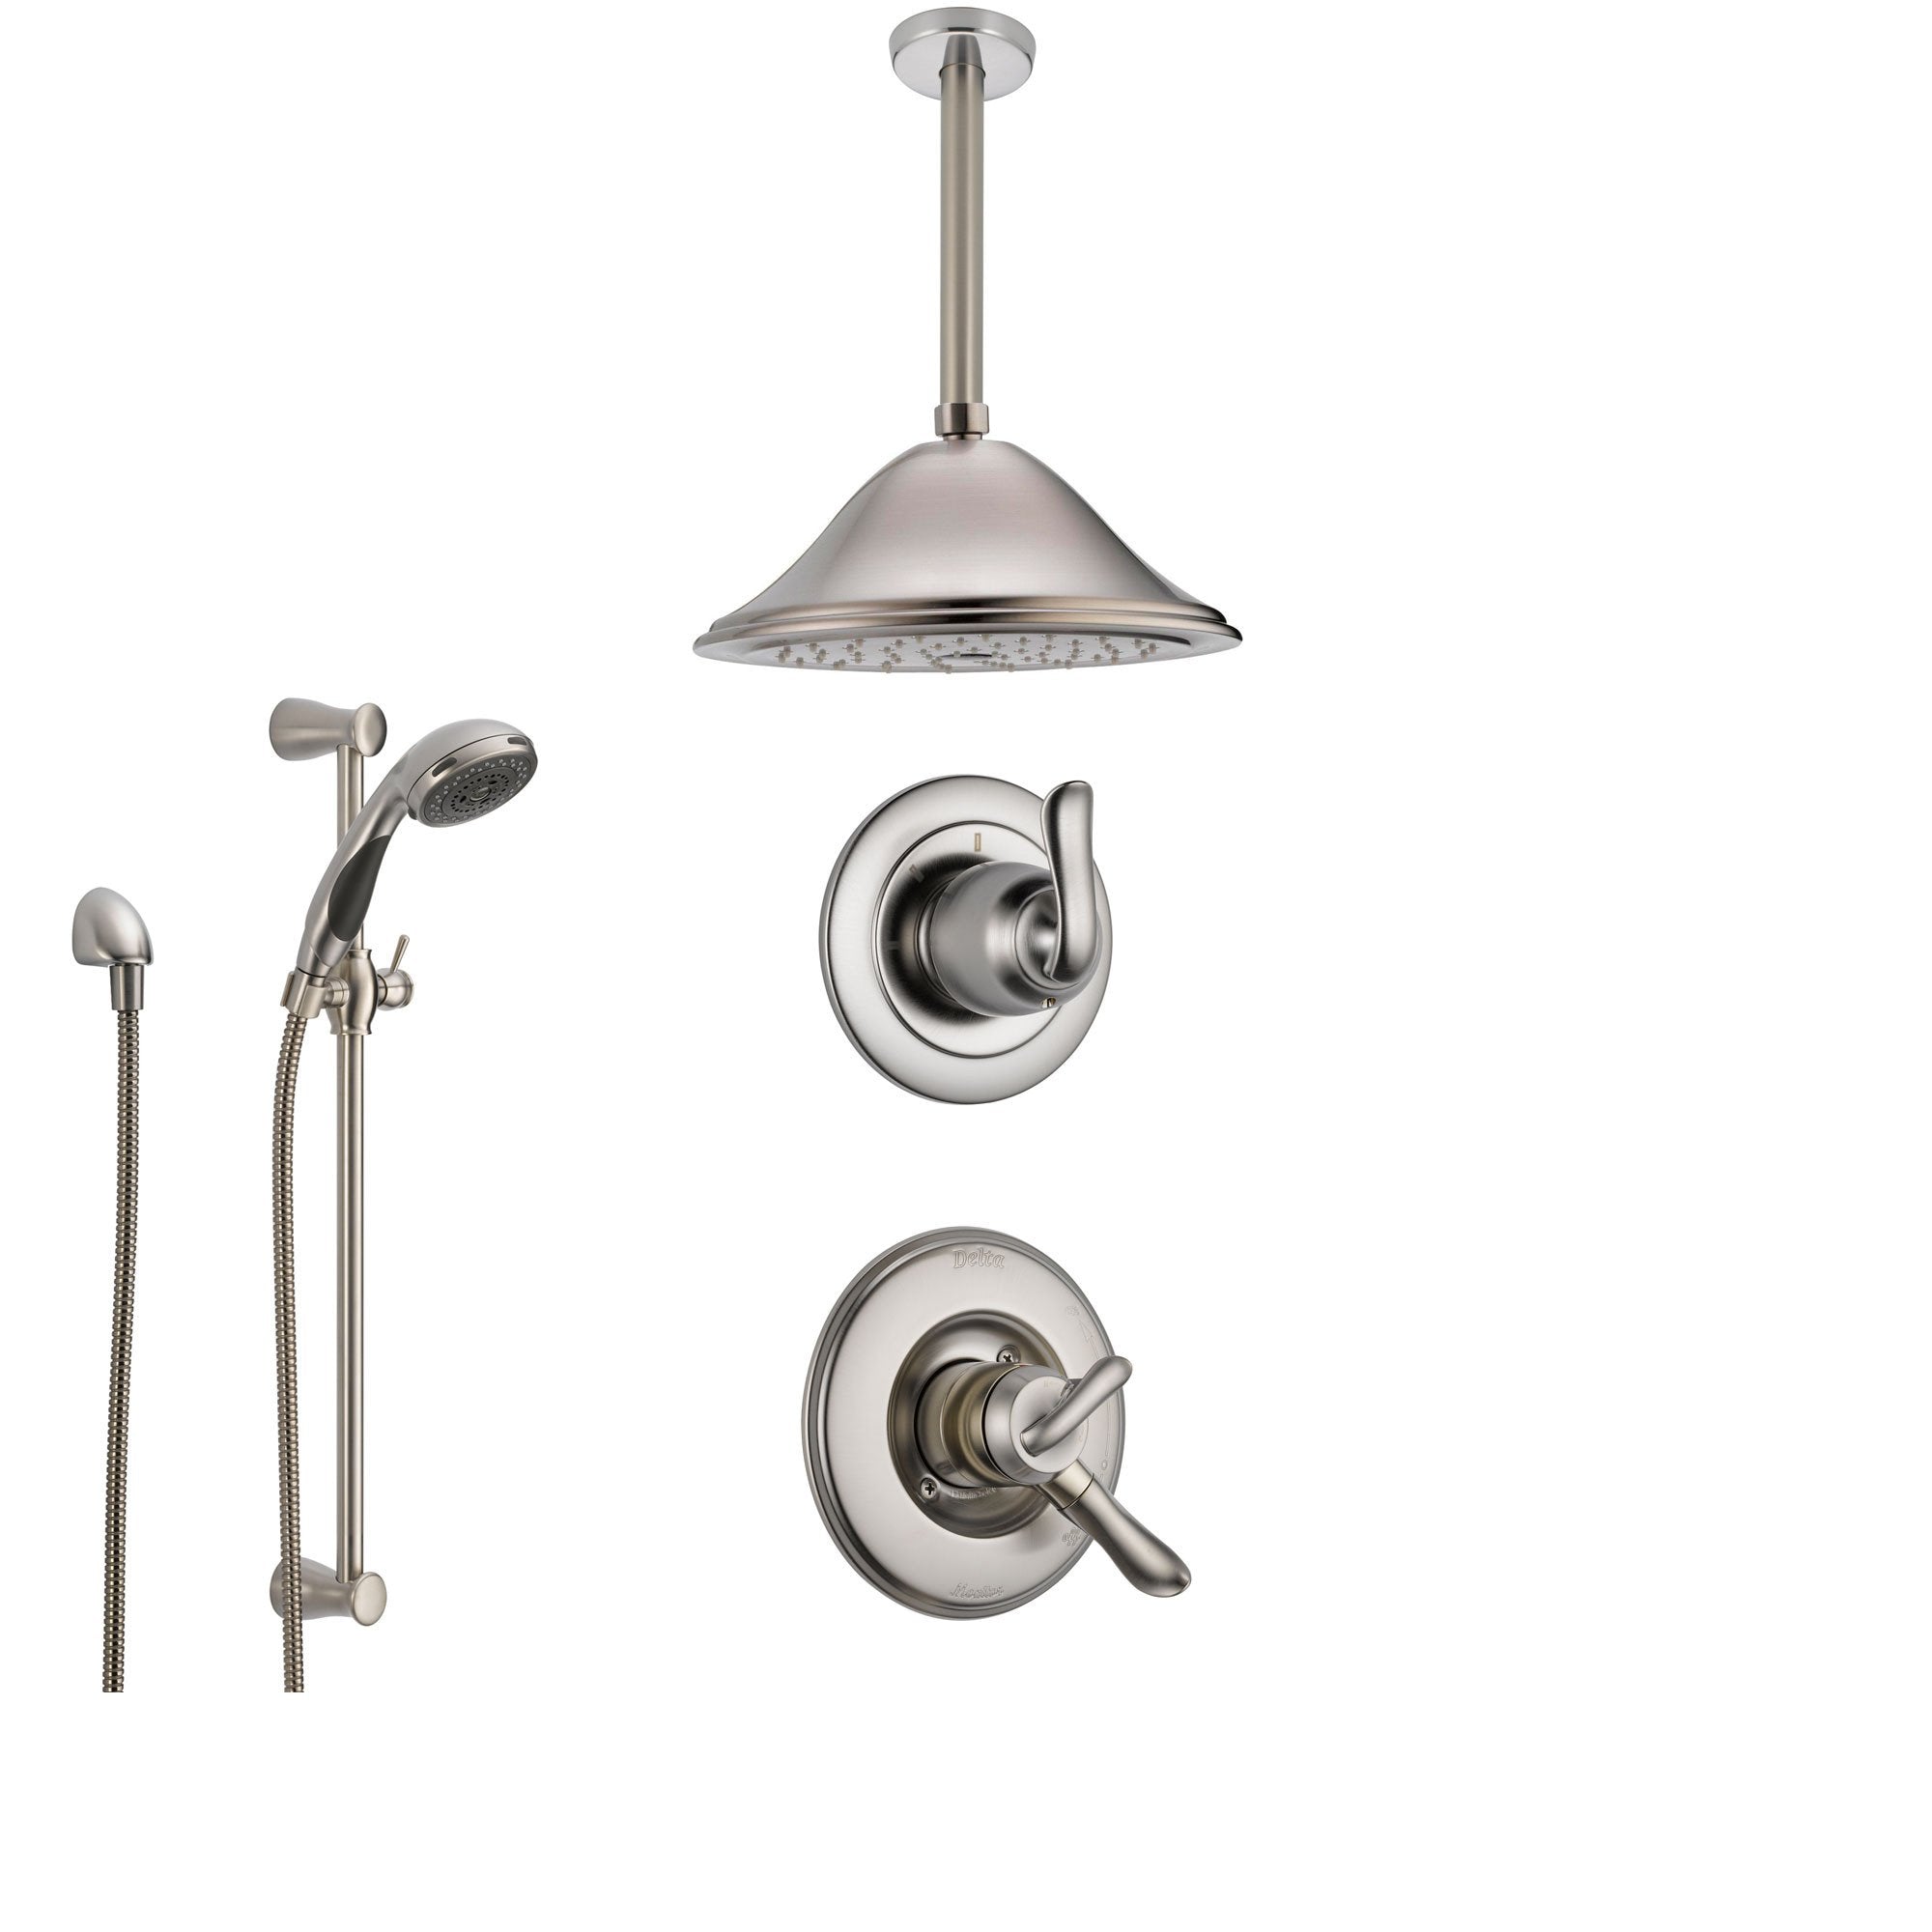 Delta Linden Stainless Steel Shower System with Dual Control Shower Handle, 3-setting Diverter, Large Ceiling Mount Rain Showerhead, and Handheld Shower SS179482SS